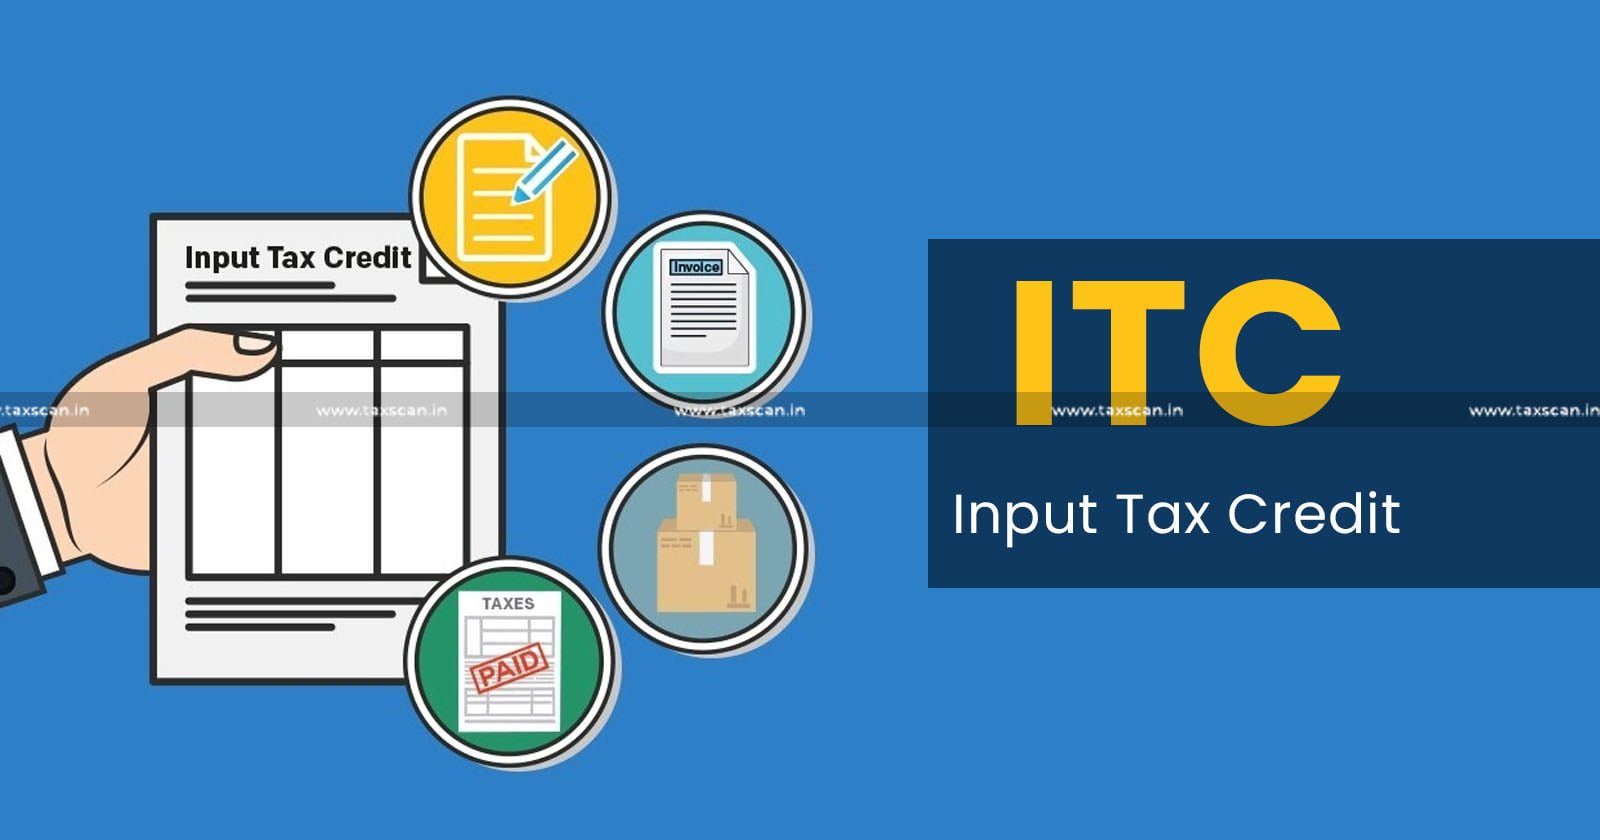 ITC is blocked -Foundation and Support Structure for ETP and Transformer - AAR - TAXSCAN